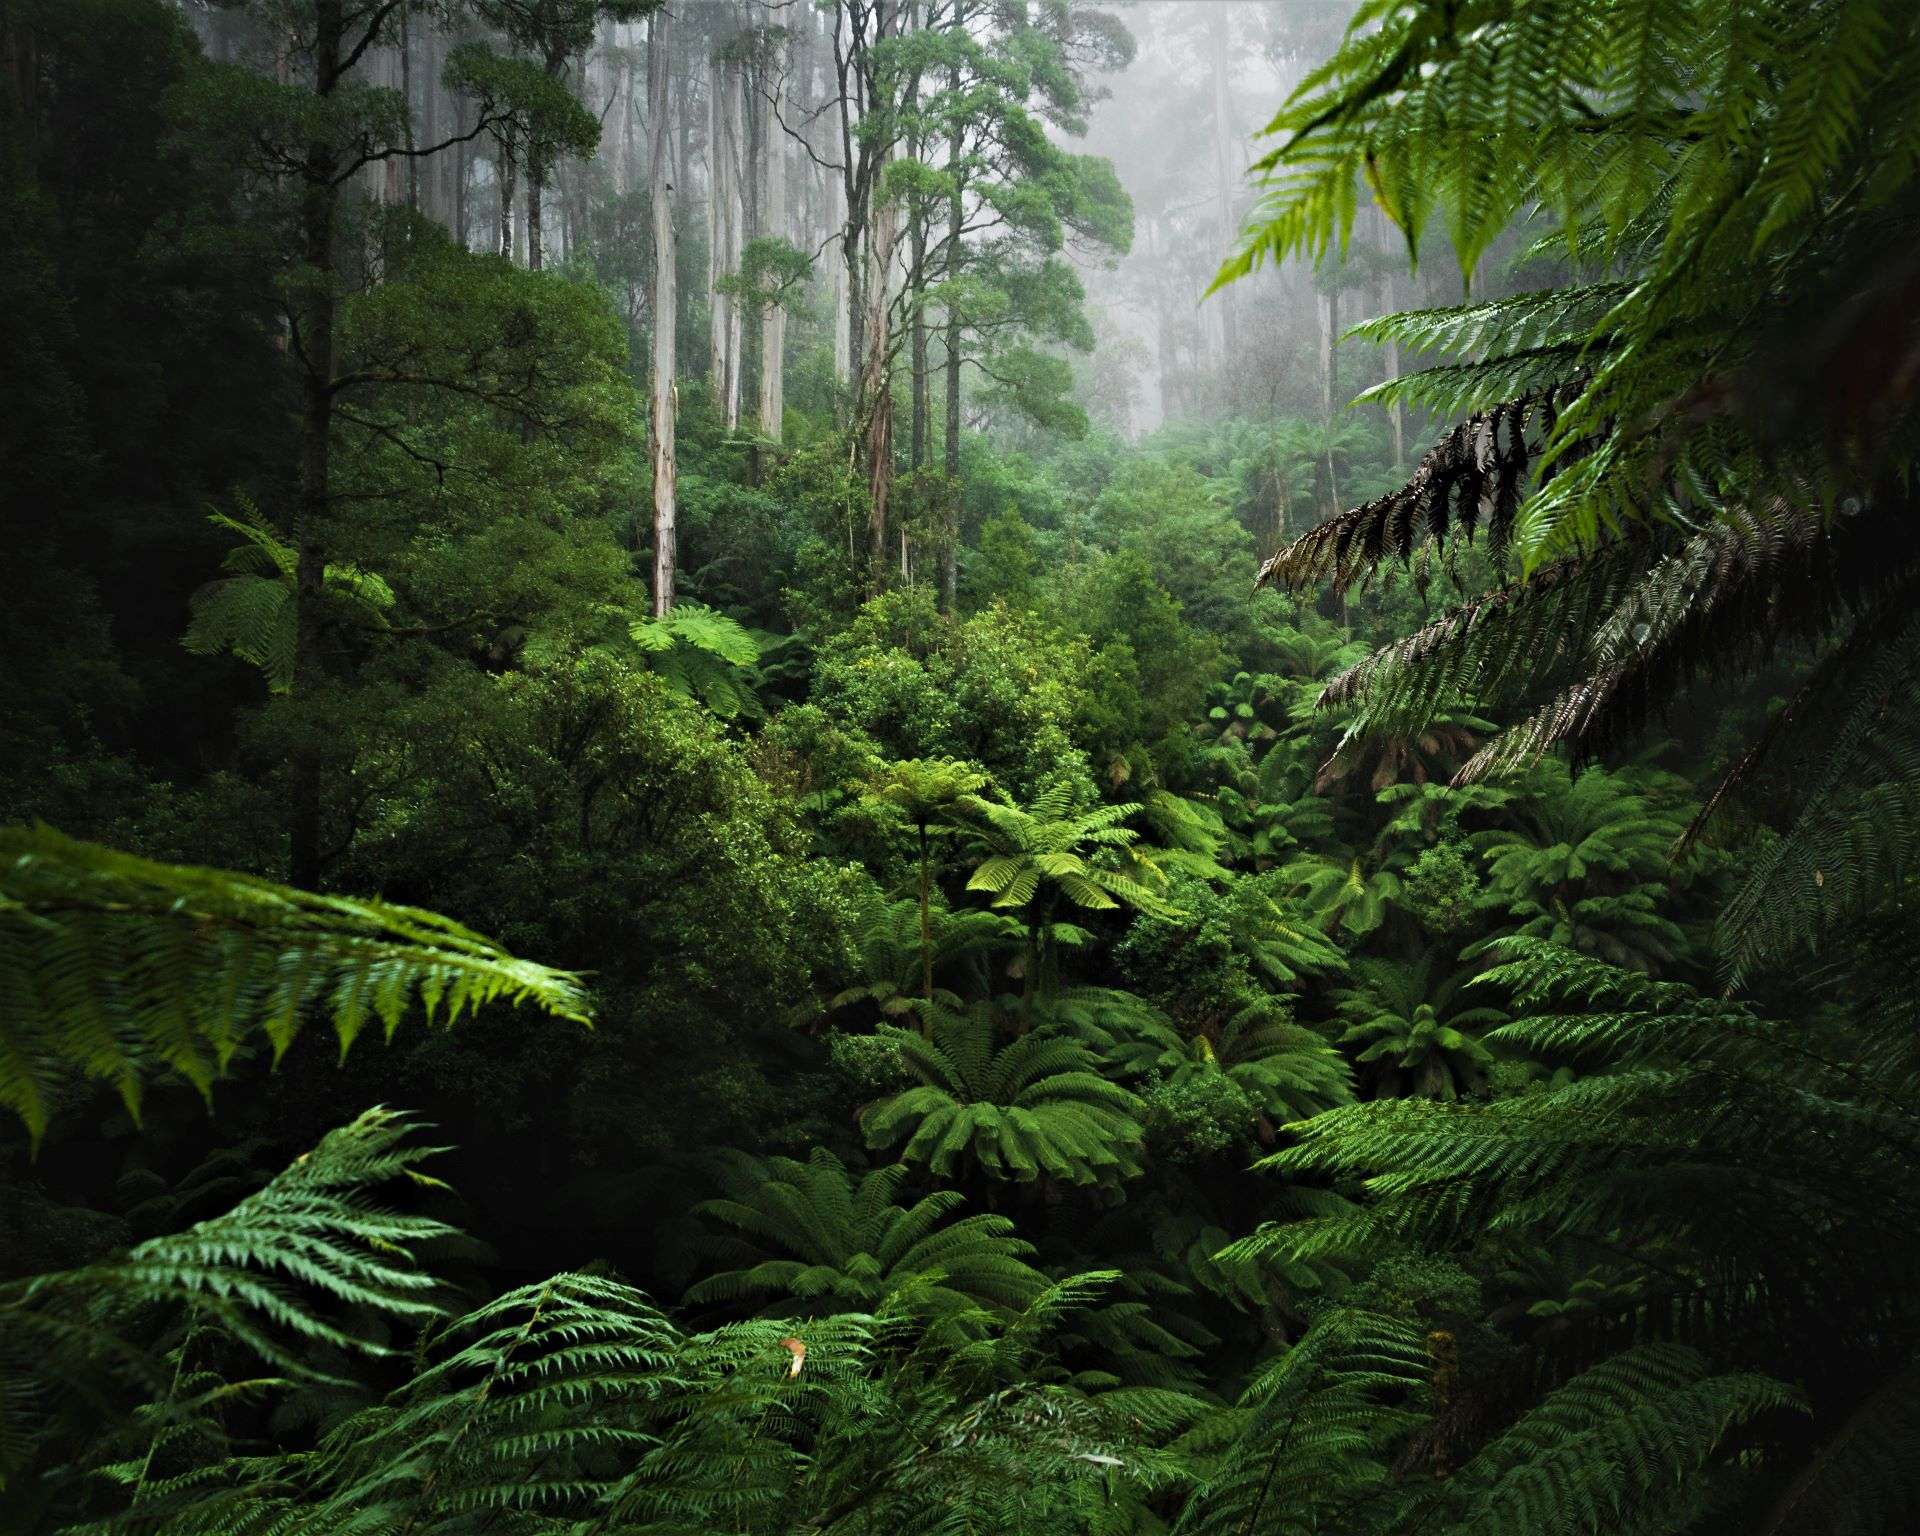 A lush rainforest with early morning fog.